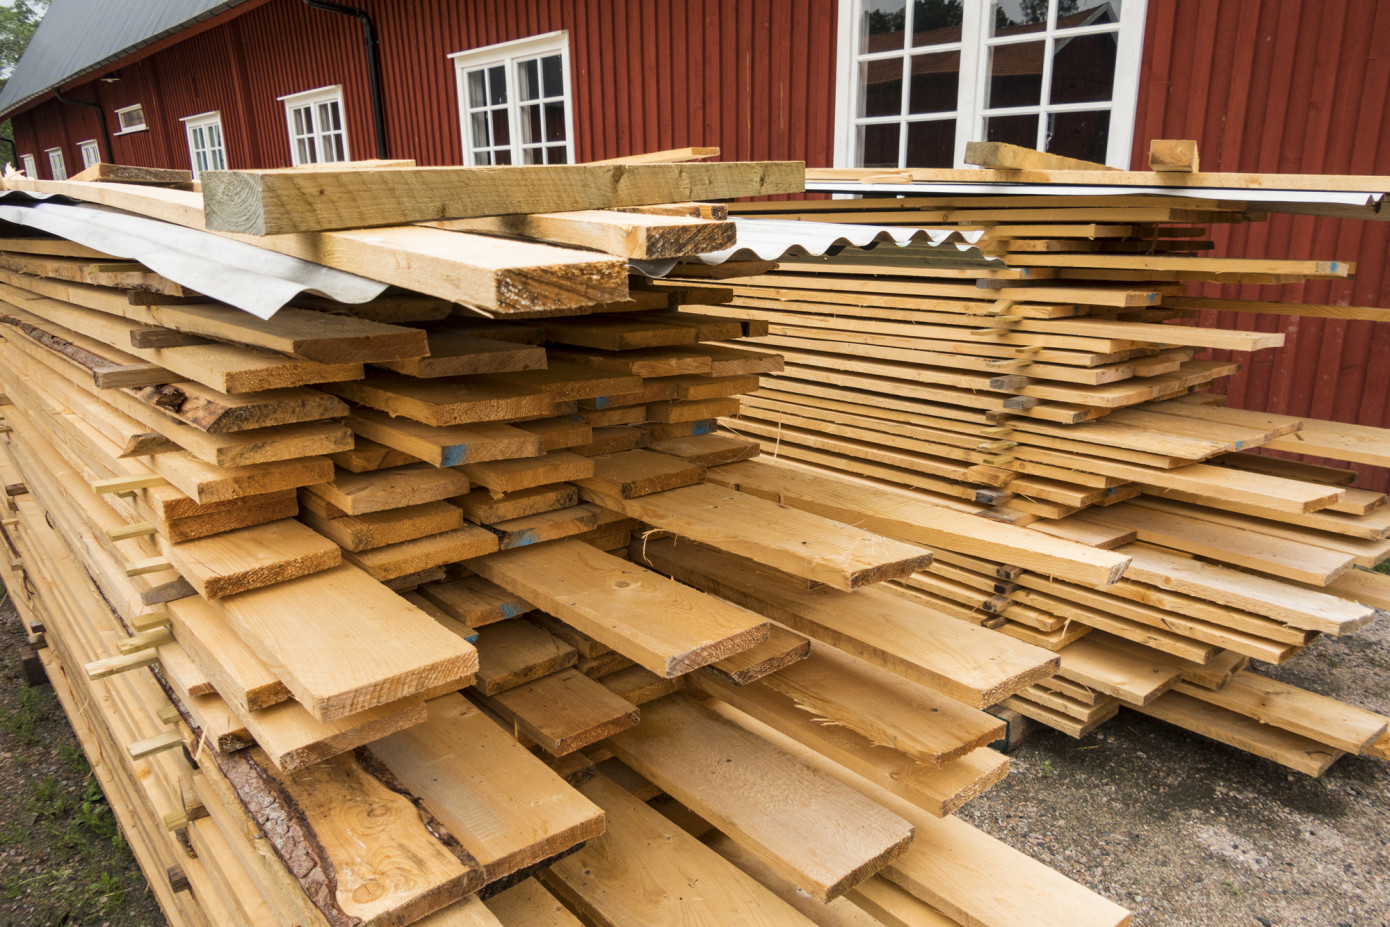 In February, price for lumber imported to United Kingdom slides 1.2%